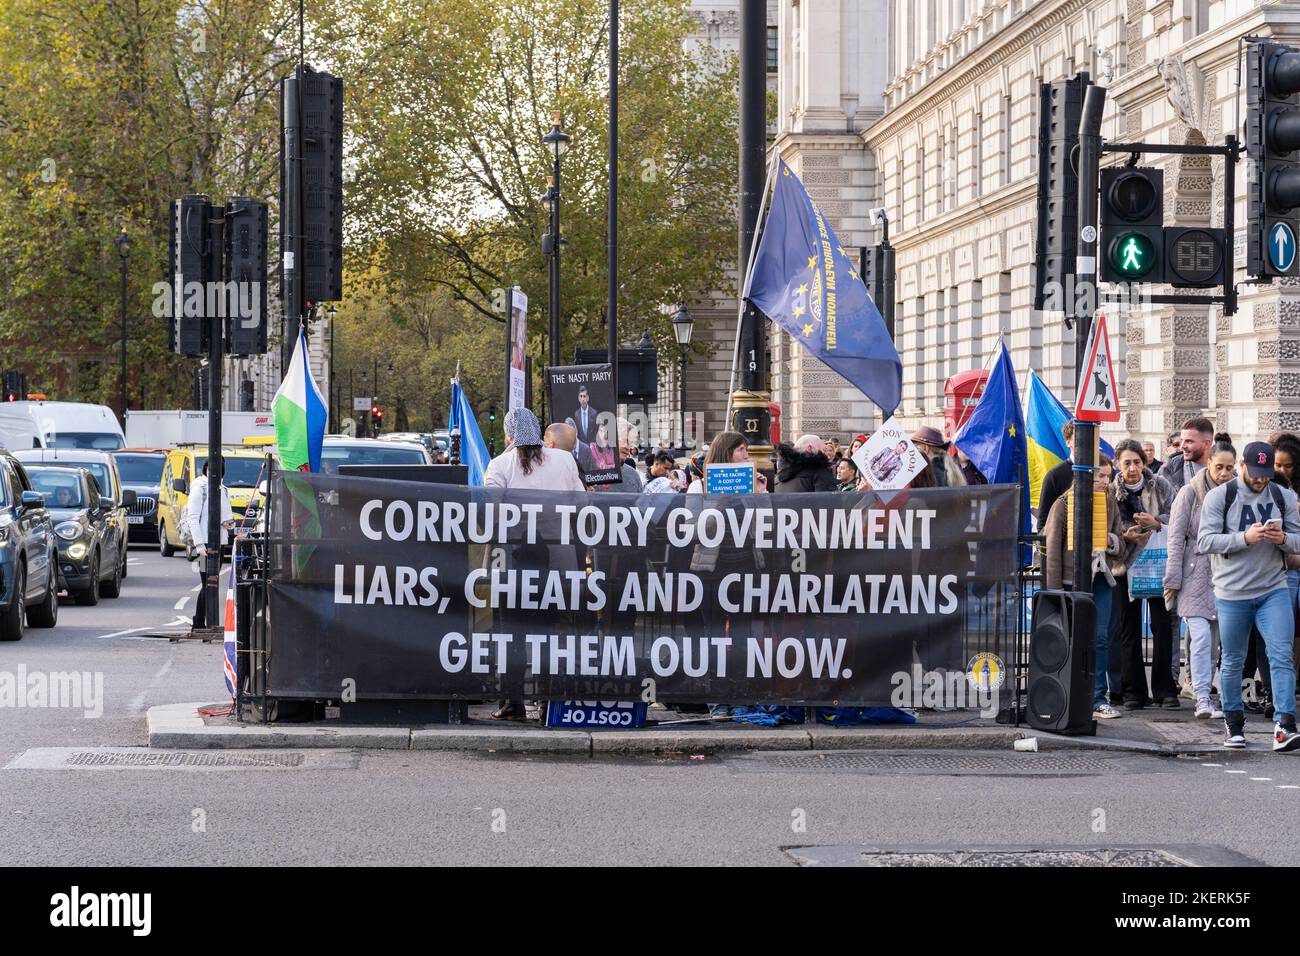 A protest group on Parliament St, London, protesting against the Tory Party and Brexit, with a banner saying 'Corrupt Tory Government...' 9th Nov 2022 Stock Photo